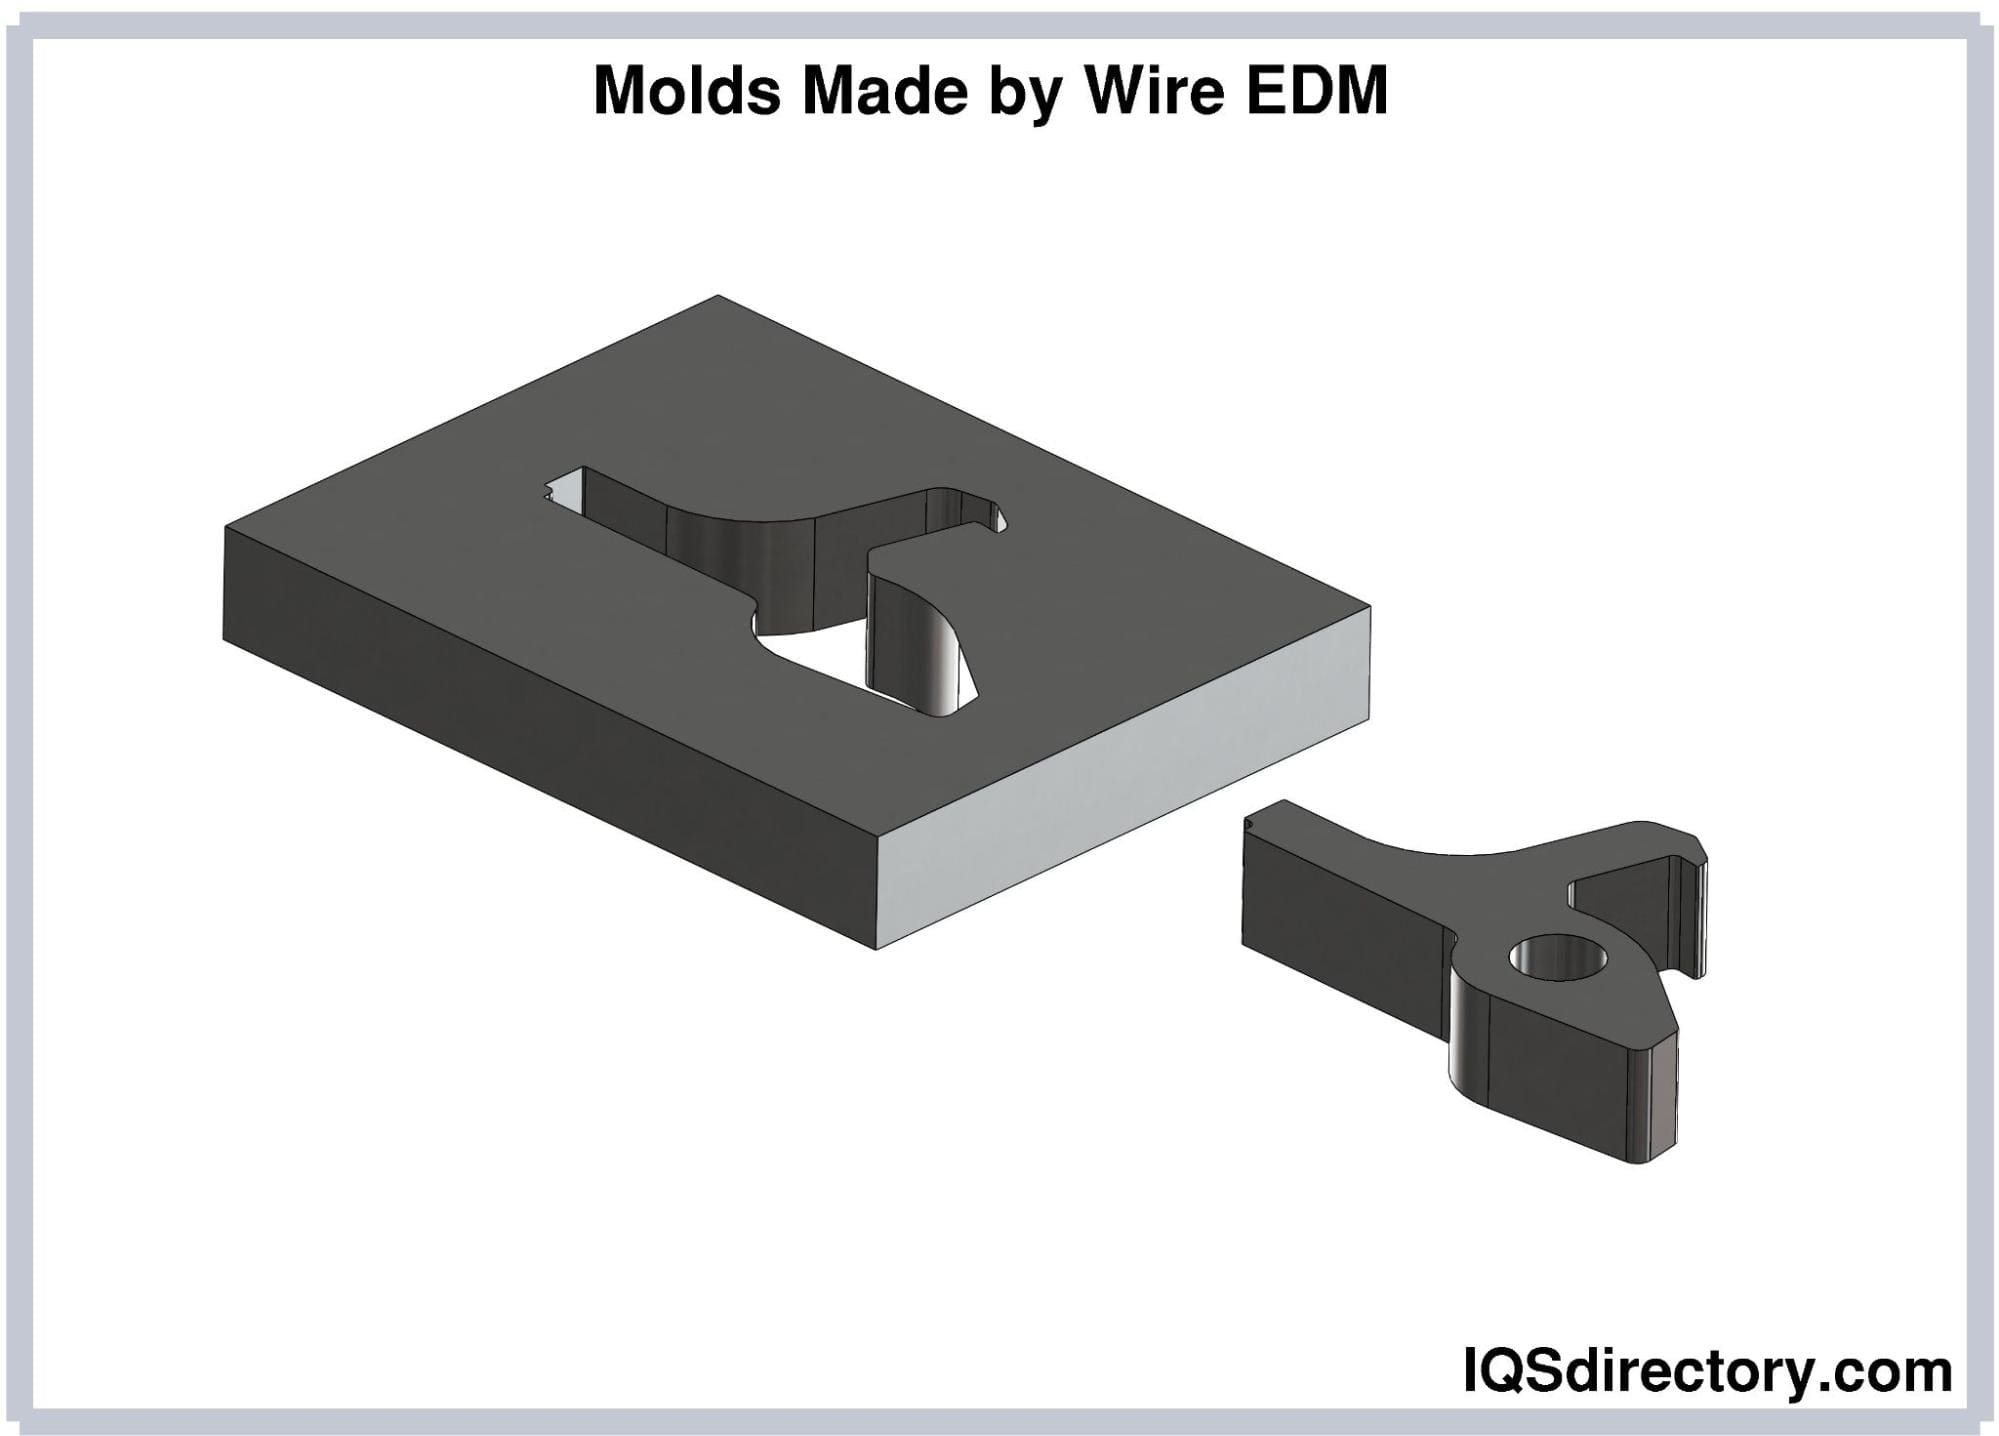 Molds Made byWire EDM